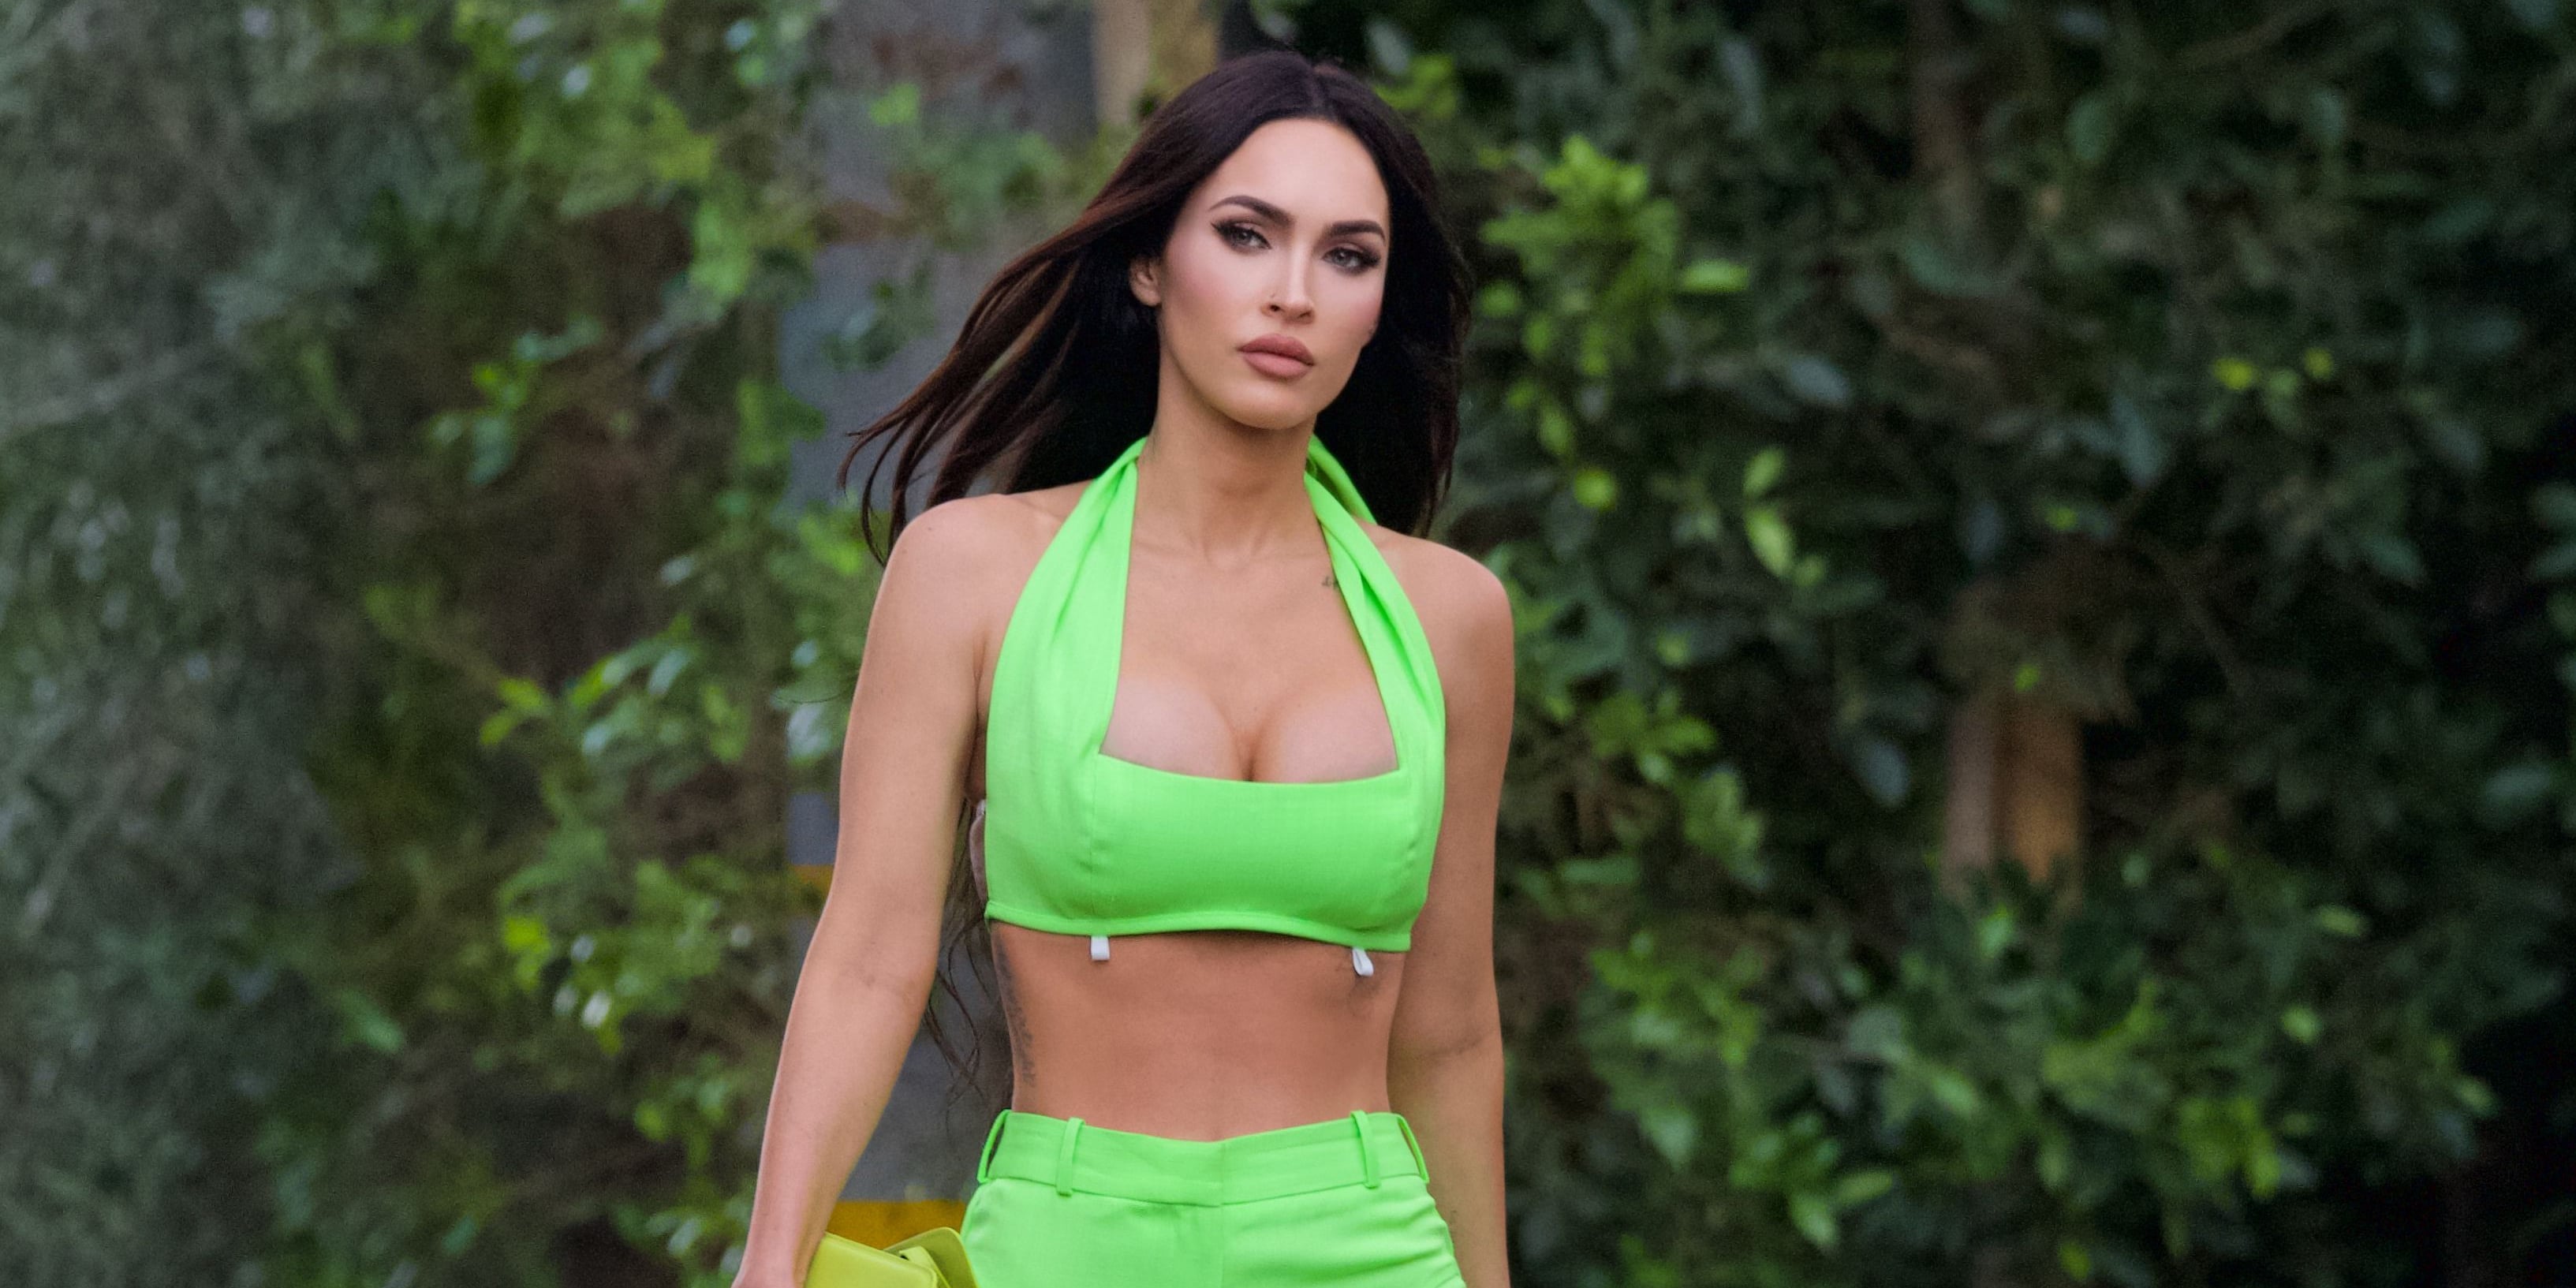 Megan Fox flashes taut midriff in sports bra as she and Machine